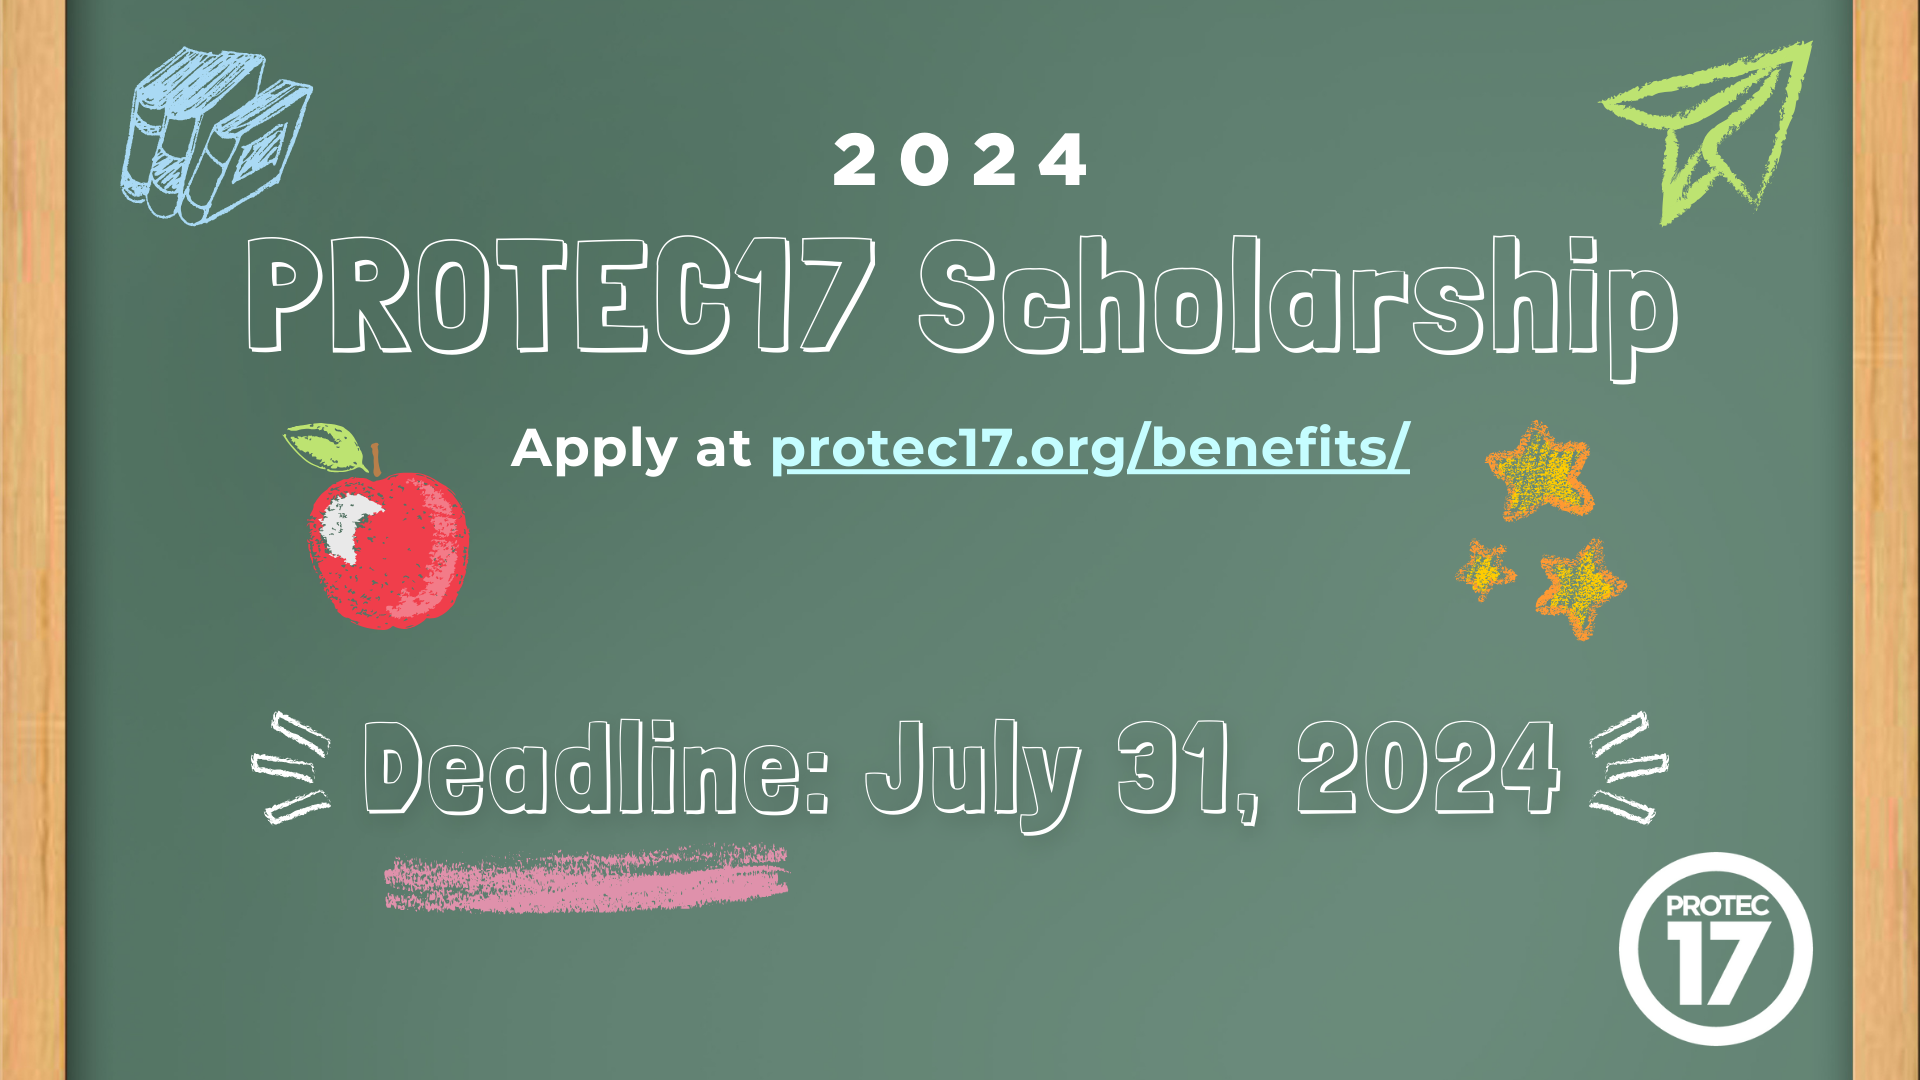 The image looks like a realistic chalkboard. The text from top to bottom reads, "2024 PROTEC17 Scholarship | Apply at protec17.org/benefits/ | Deadline: July 31, 2024" There are cute chalk drawings around the words such as: a stack of books, a flying paper airplane, stars, and an apple. The PROTEC17 logo is in the bottom right.